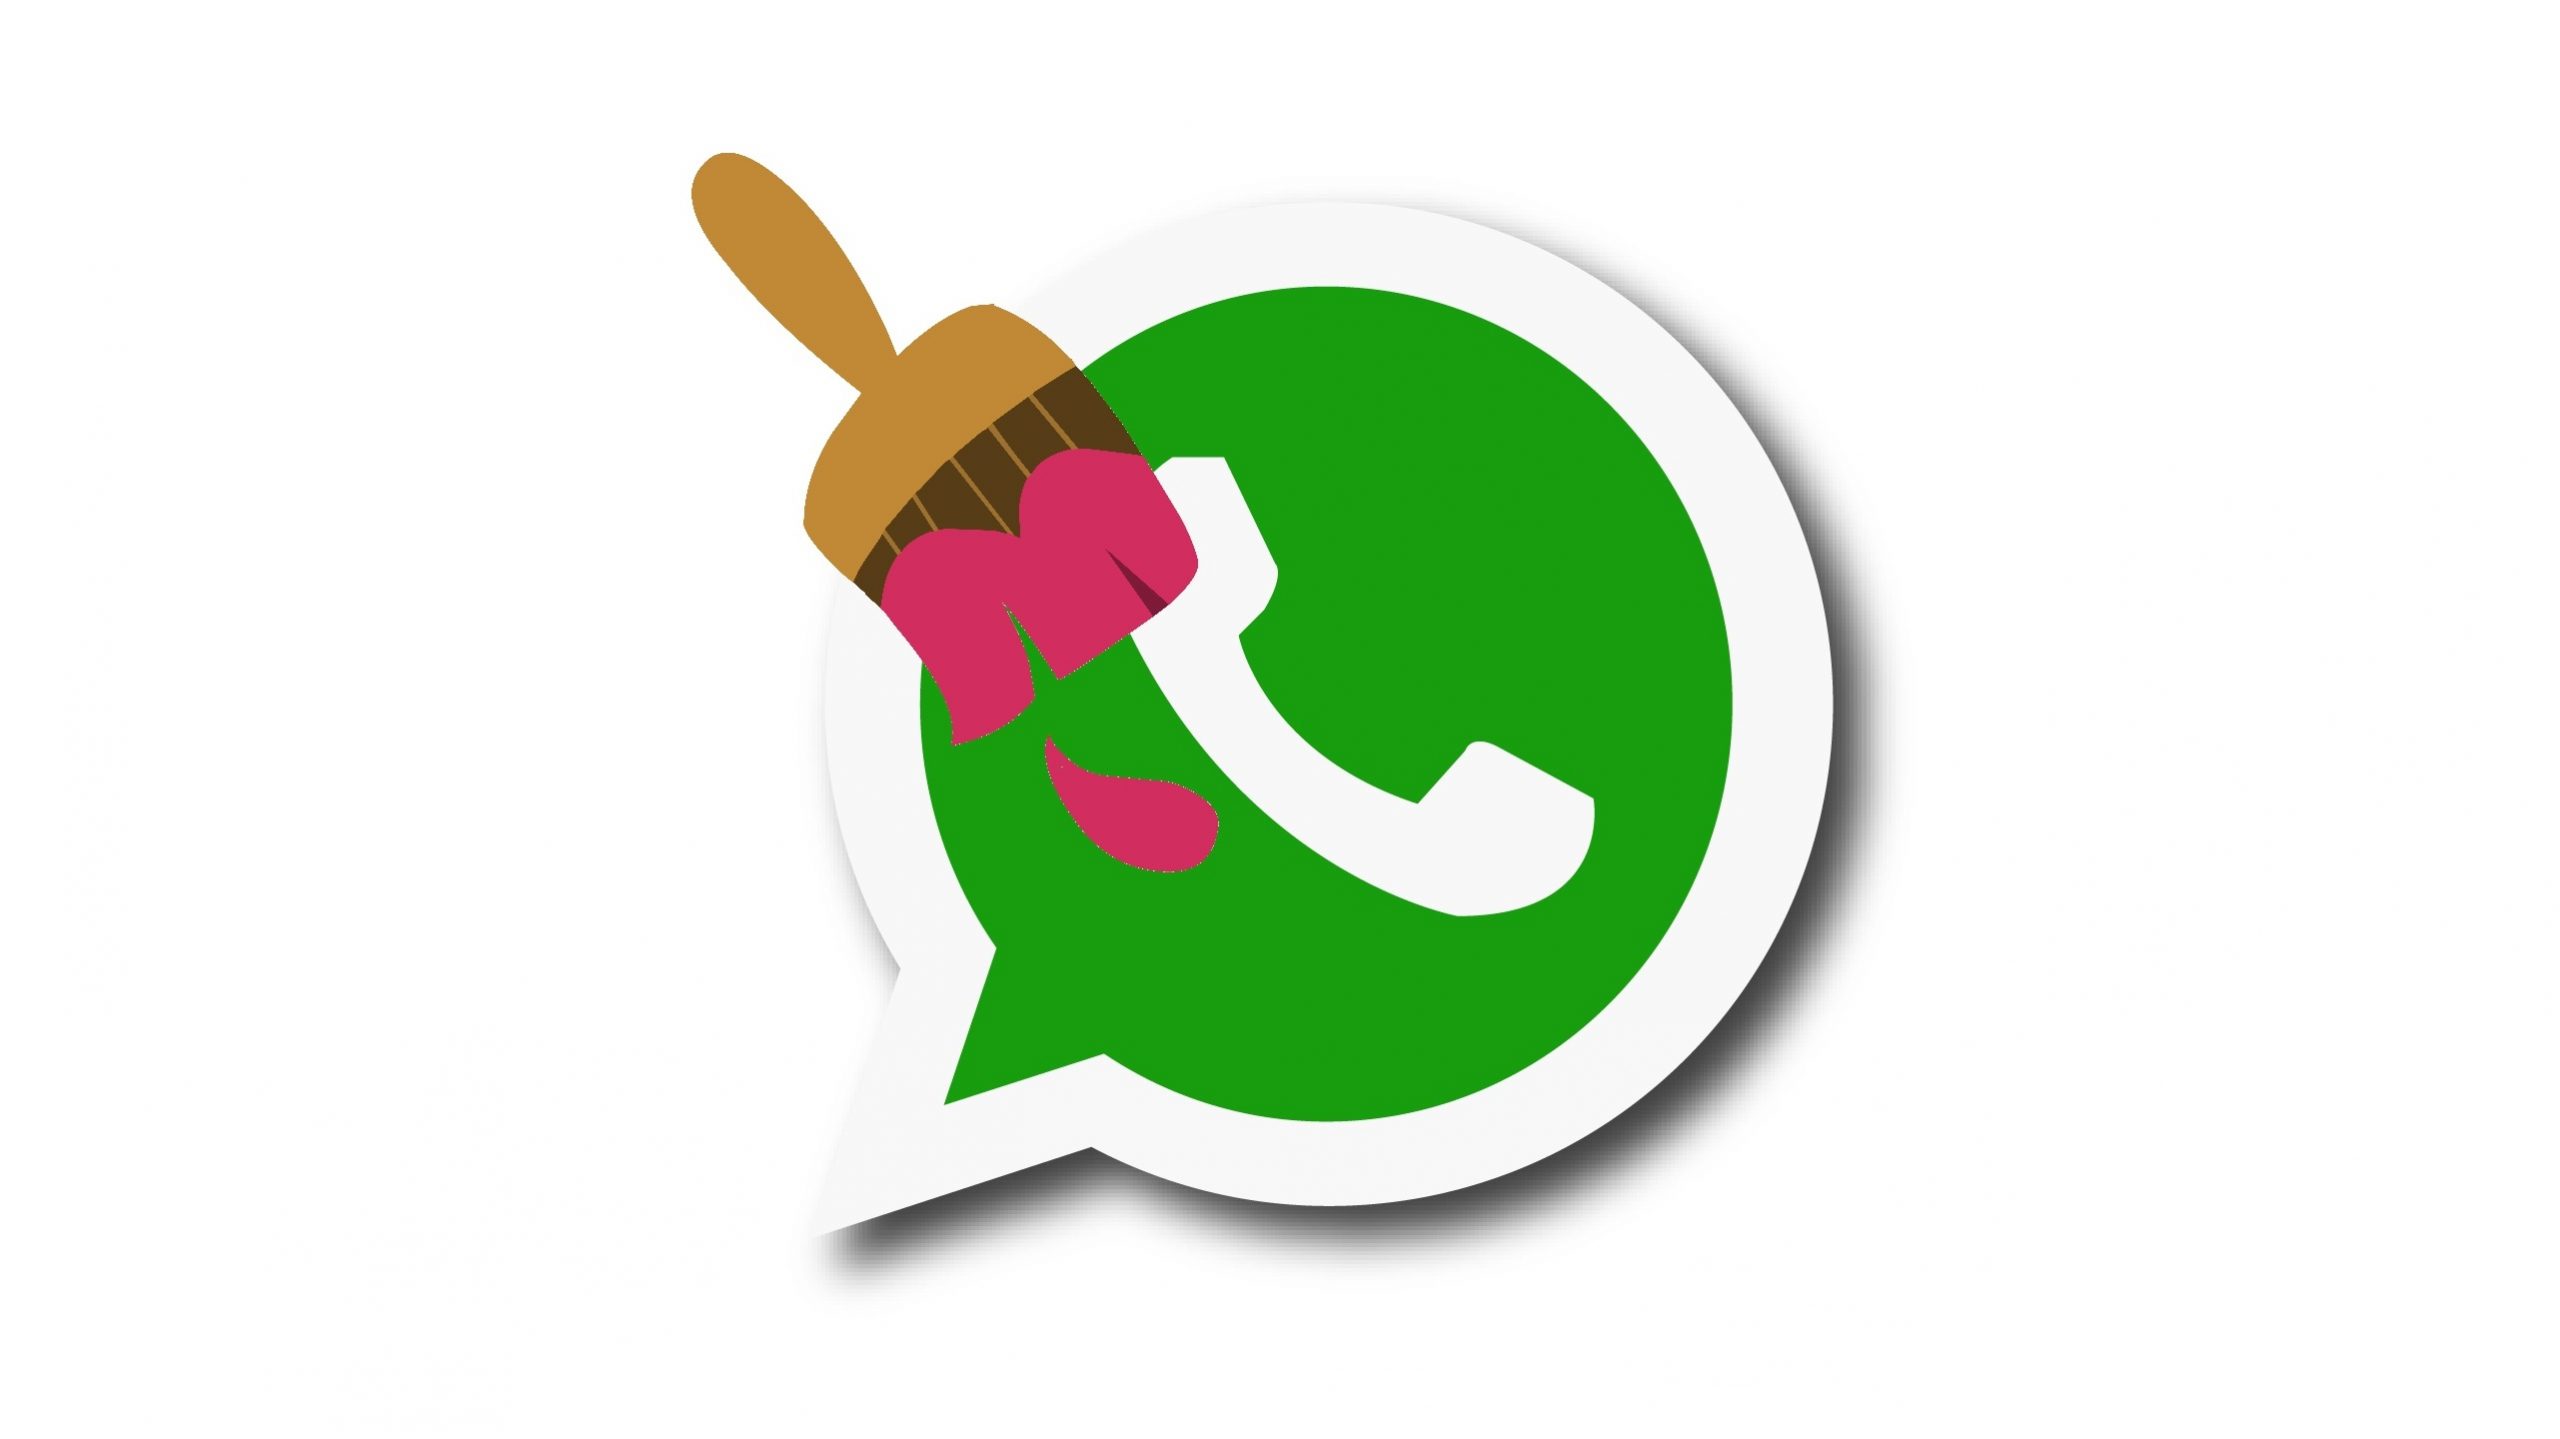 After the WhatsApp voice calling feature, the new app seems to be update with Material Design implementations and the eye-candy design is welcoming